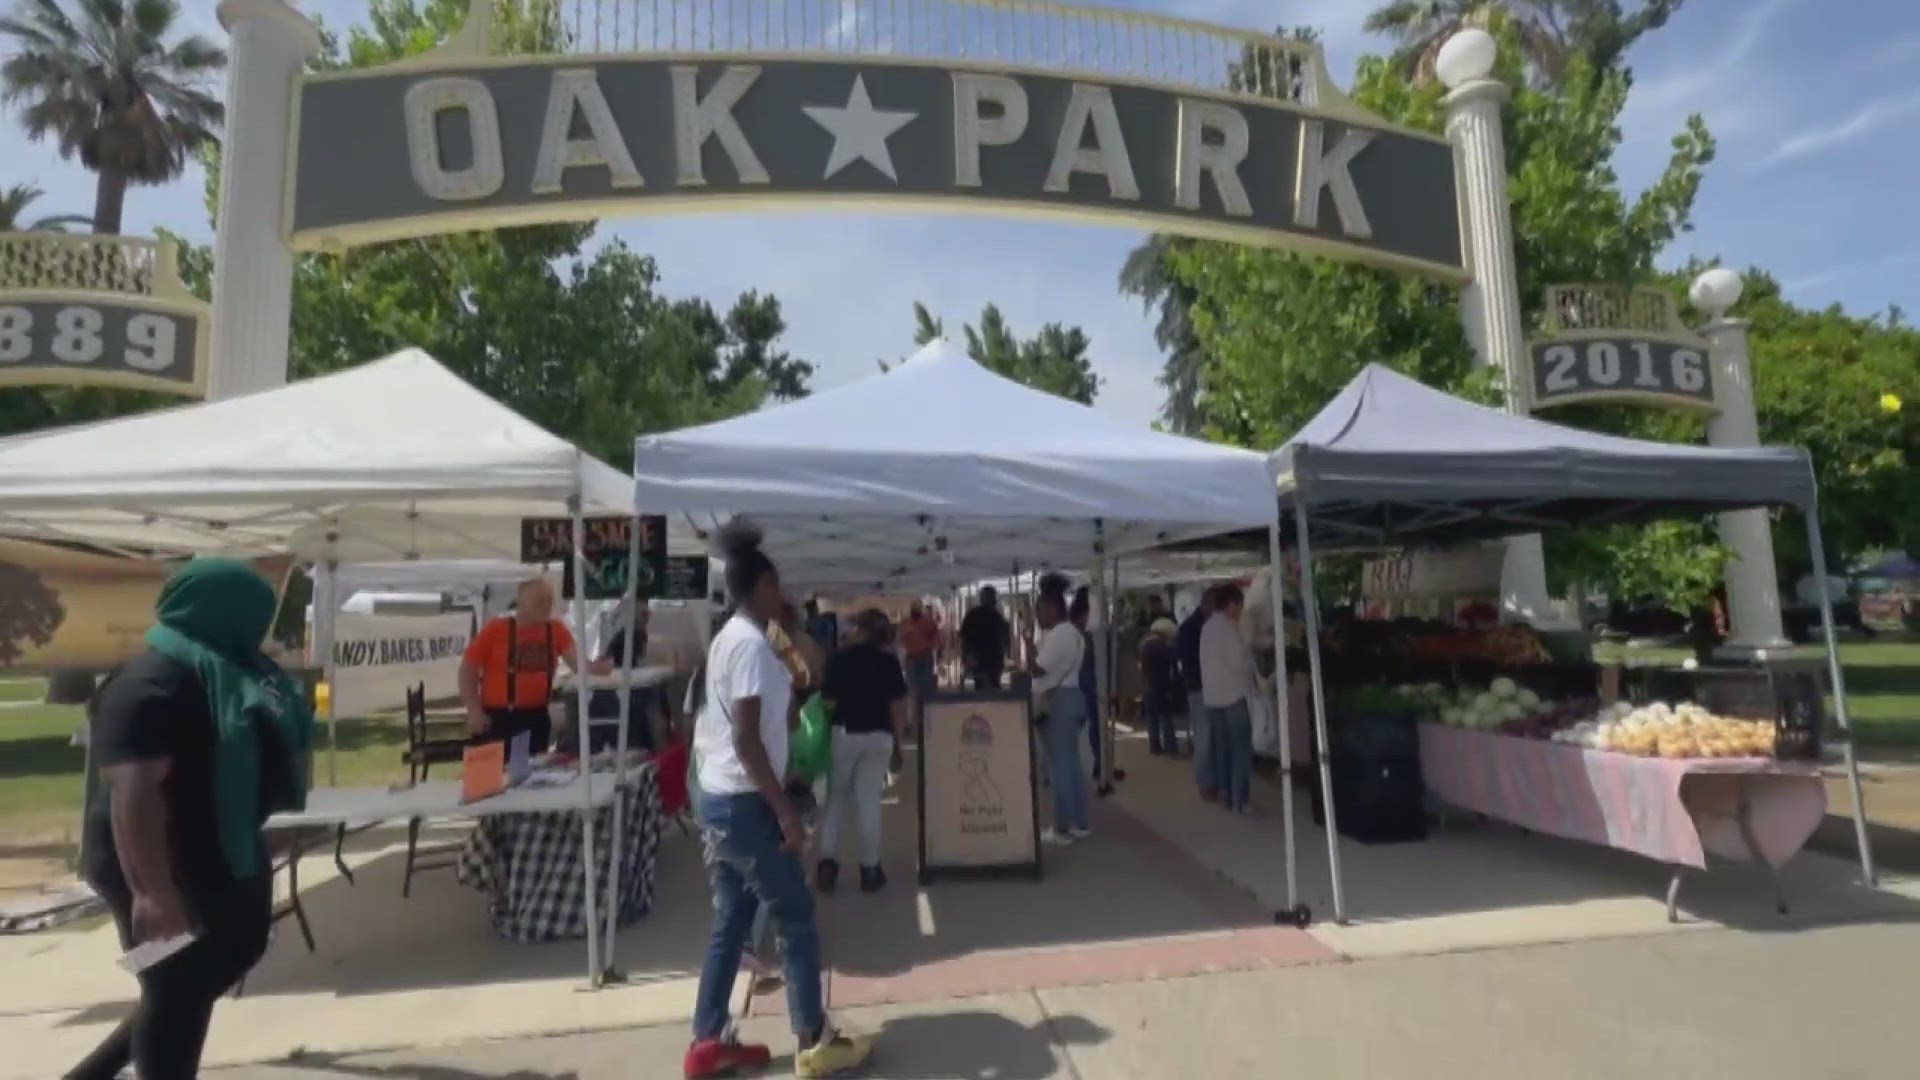 The Oak Park Farmers Market returned to the area after being shut down for a year when its nonprofit host backed out.